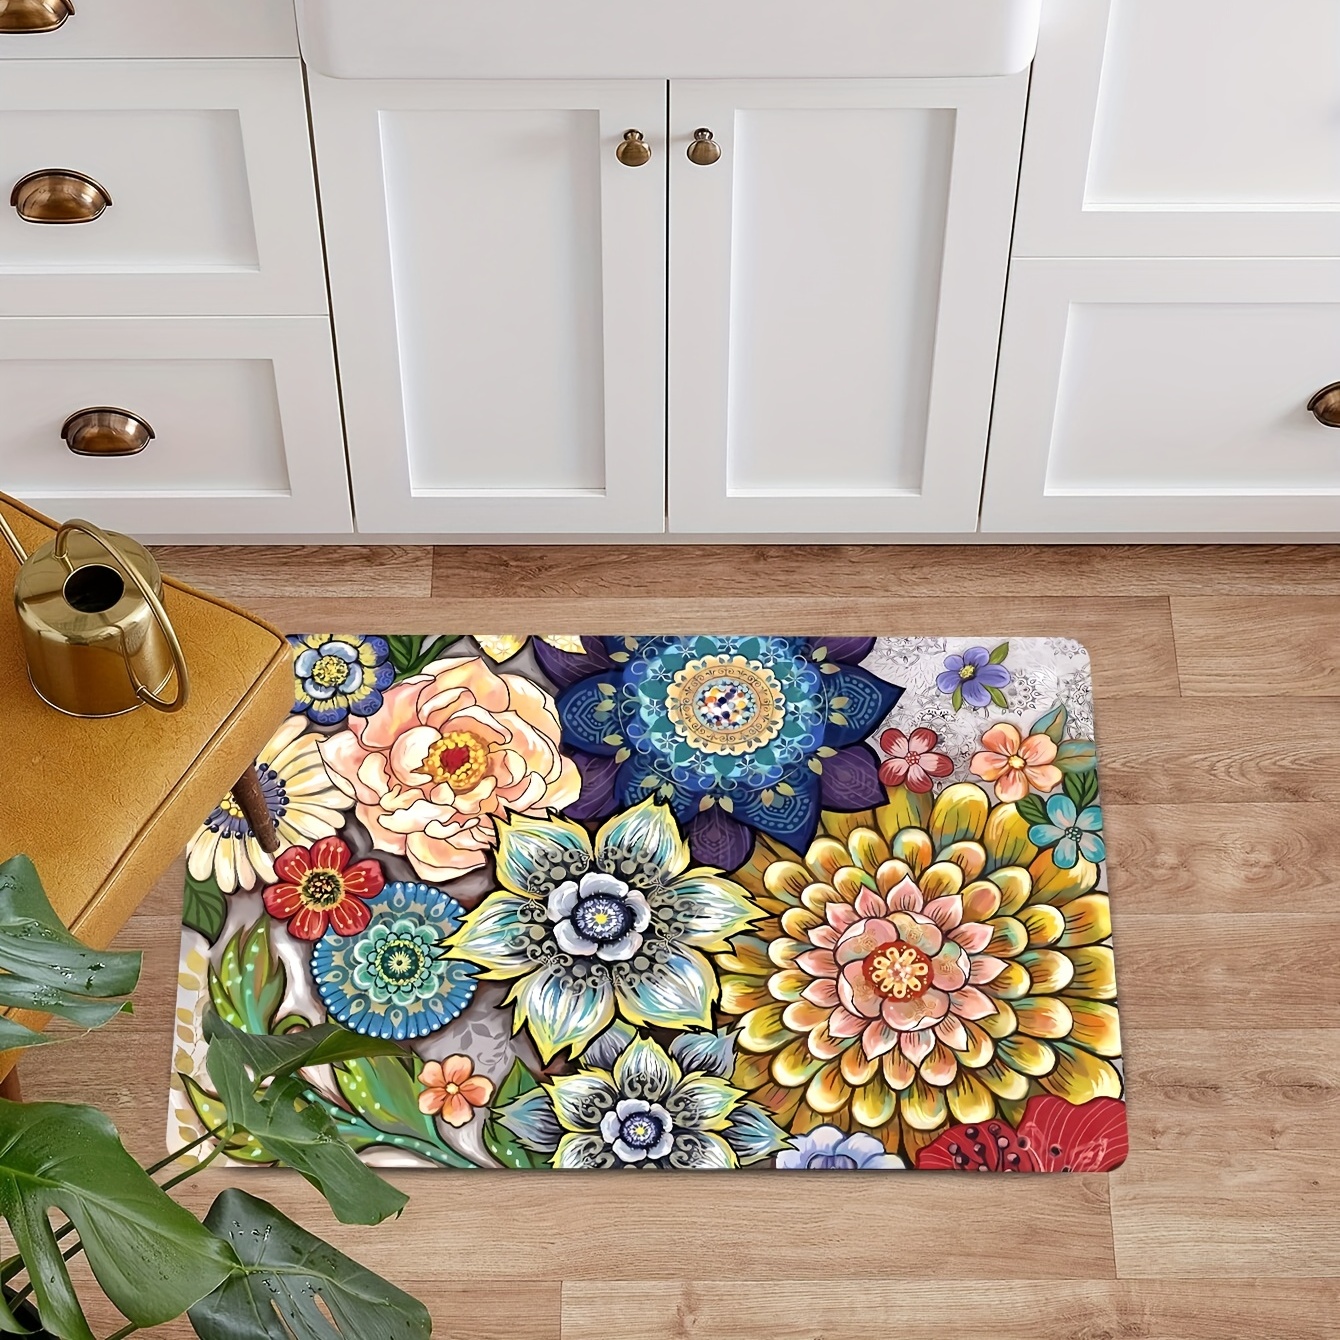  Sailground Kitchen Rugs, Bee and Small Daisies on Wood Kitchen  Rug, Ktchen Gadgets Anti-Fatigue Kitchen Mat, Floor Mats for Kitchen Decor  & Laundry Room Decor, 2PCS Runner Rug, Kitchen Mats for